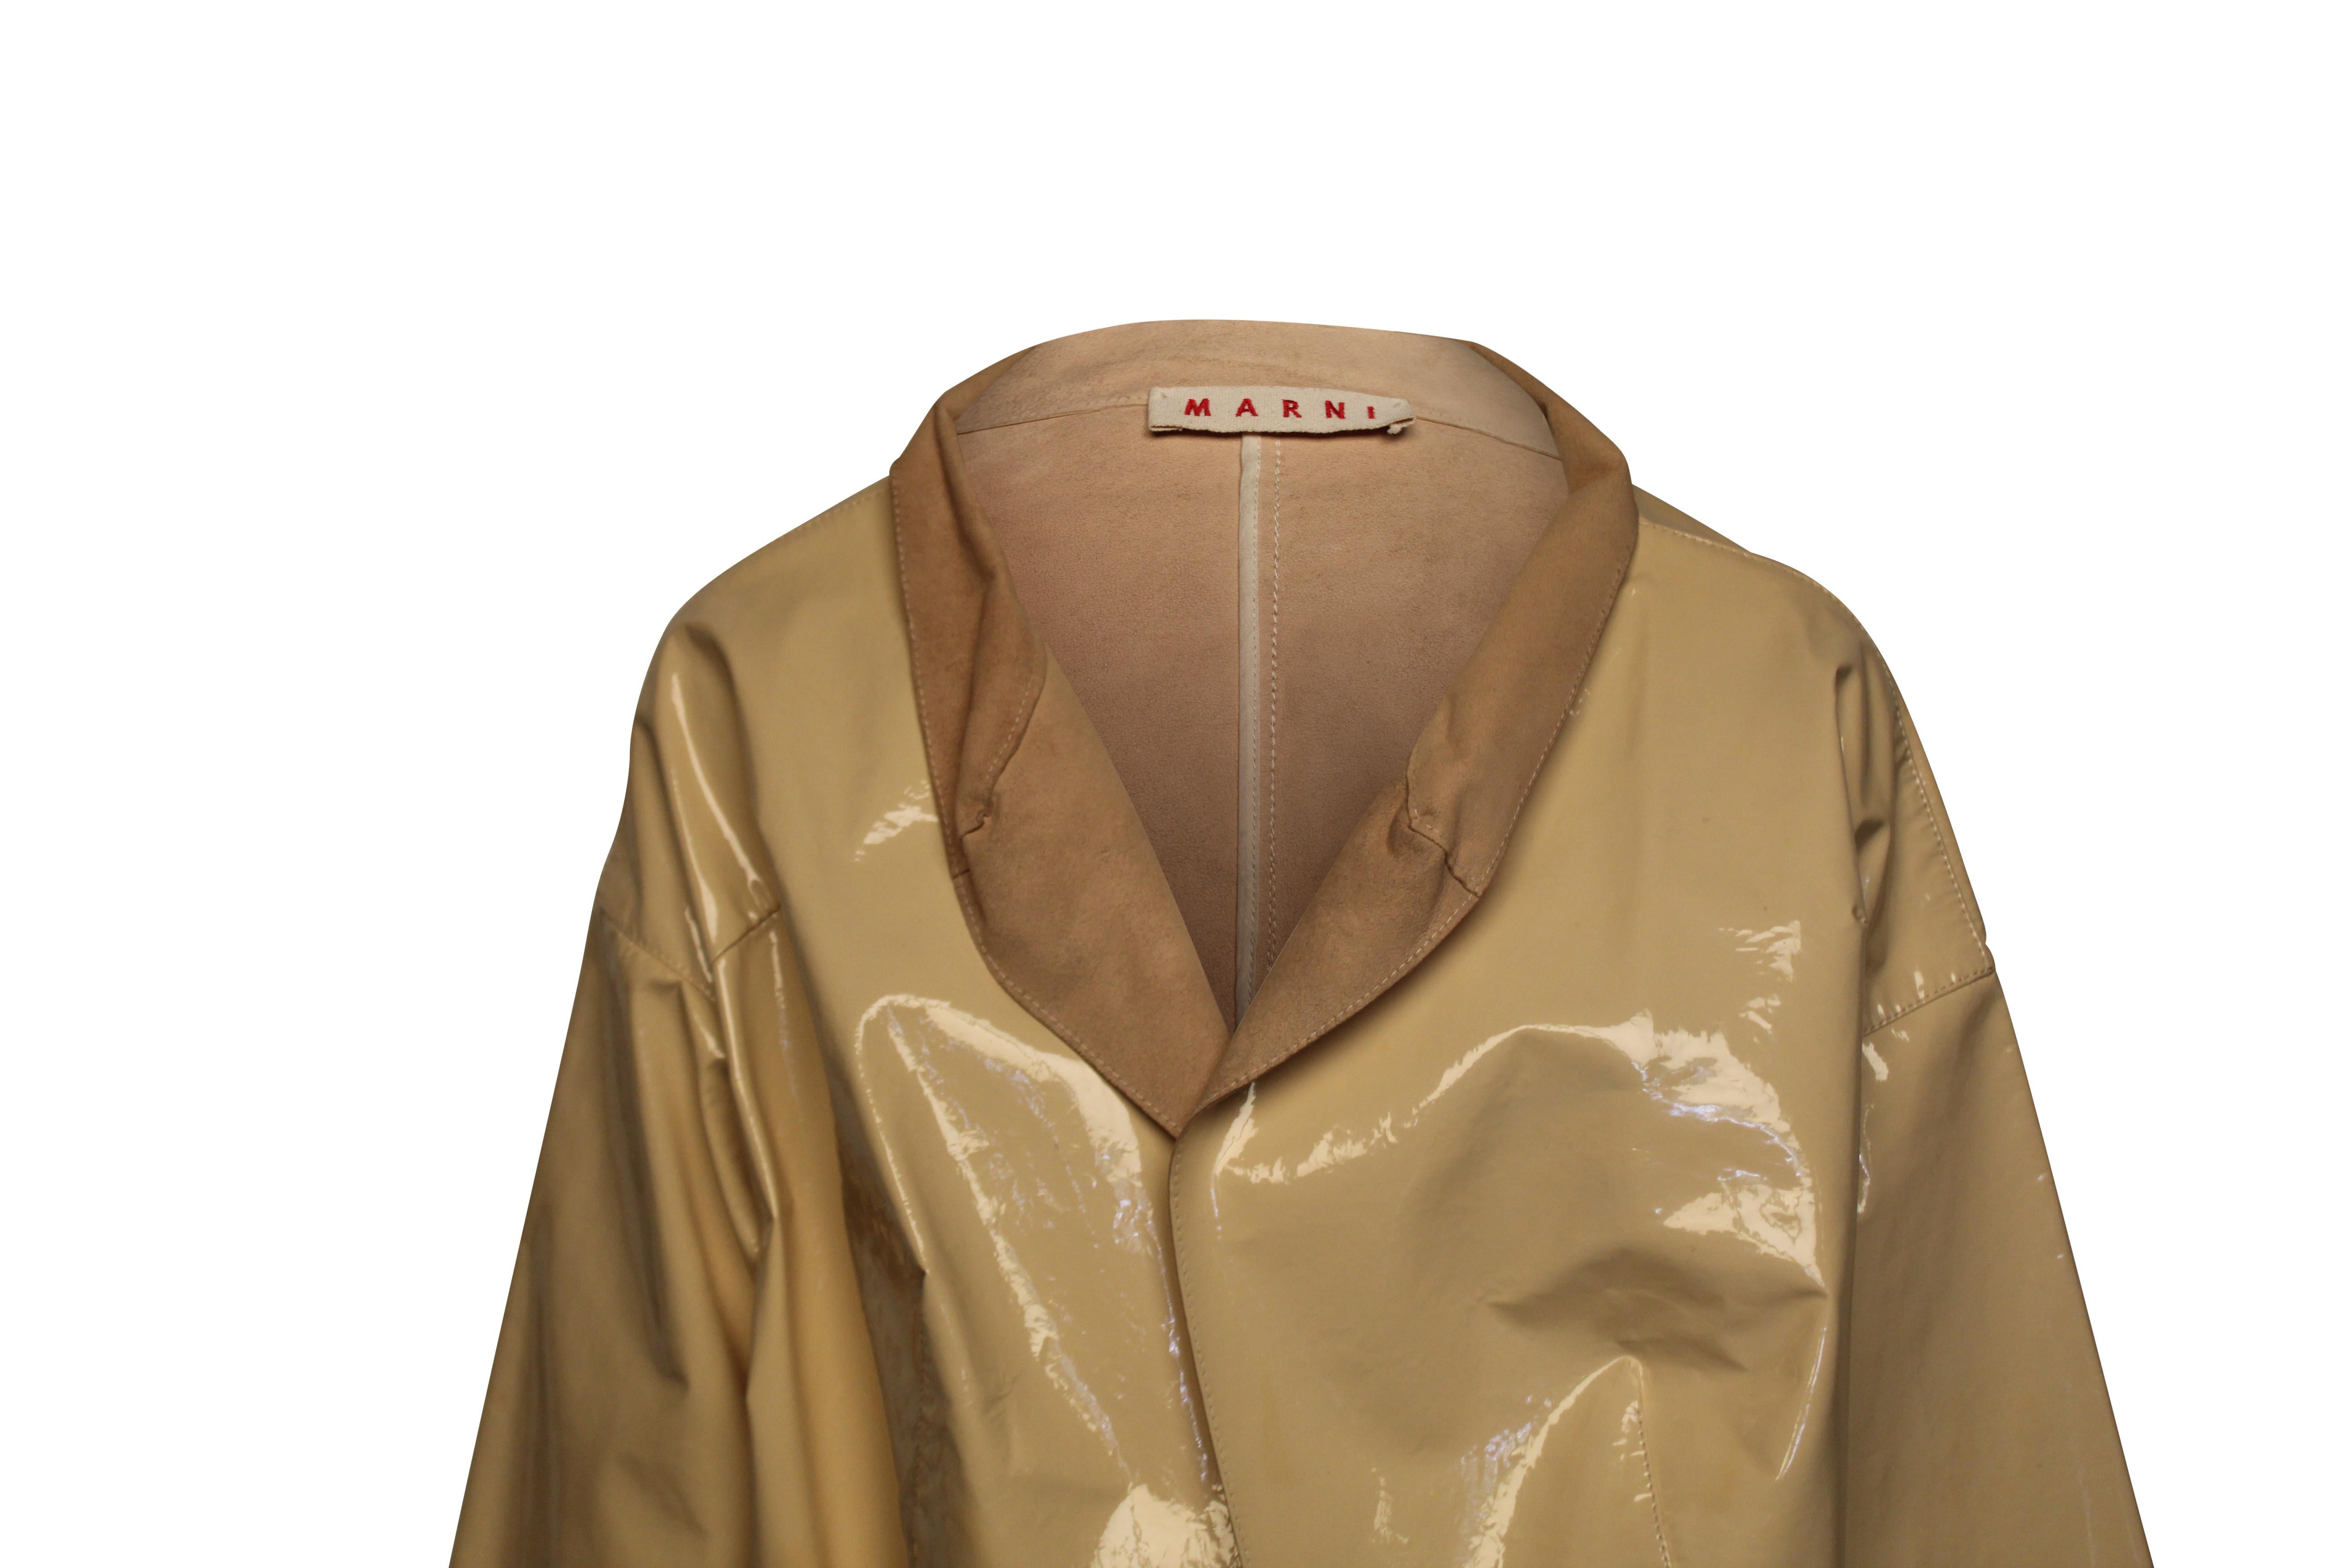 Marni beige patent leather jacket with suede interior made from calf and sheep skin. Made in Italy. Size 42.

